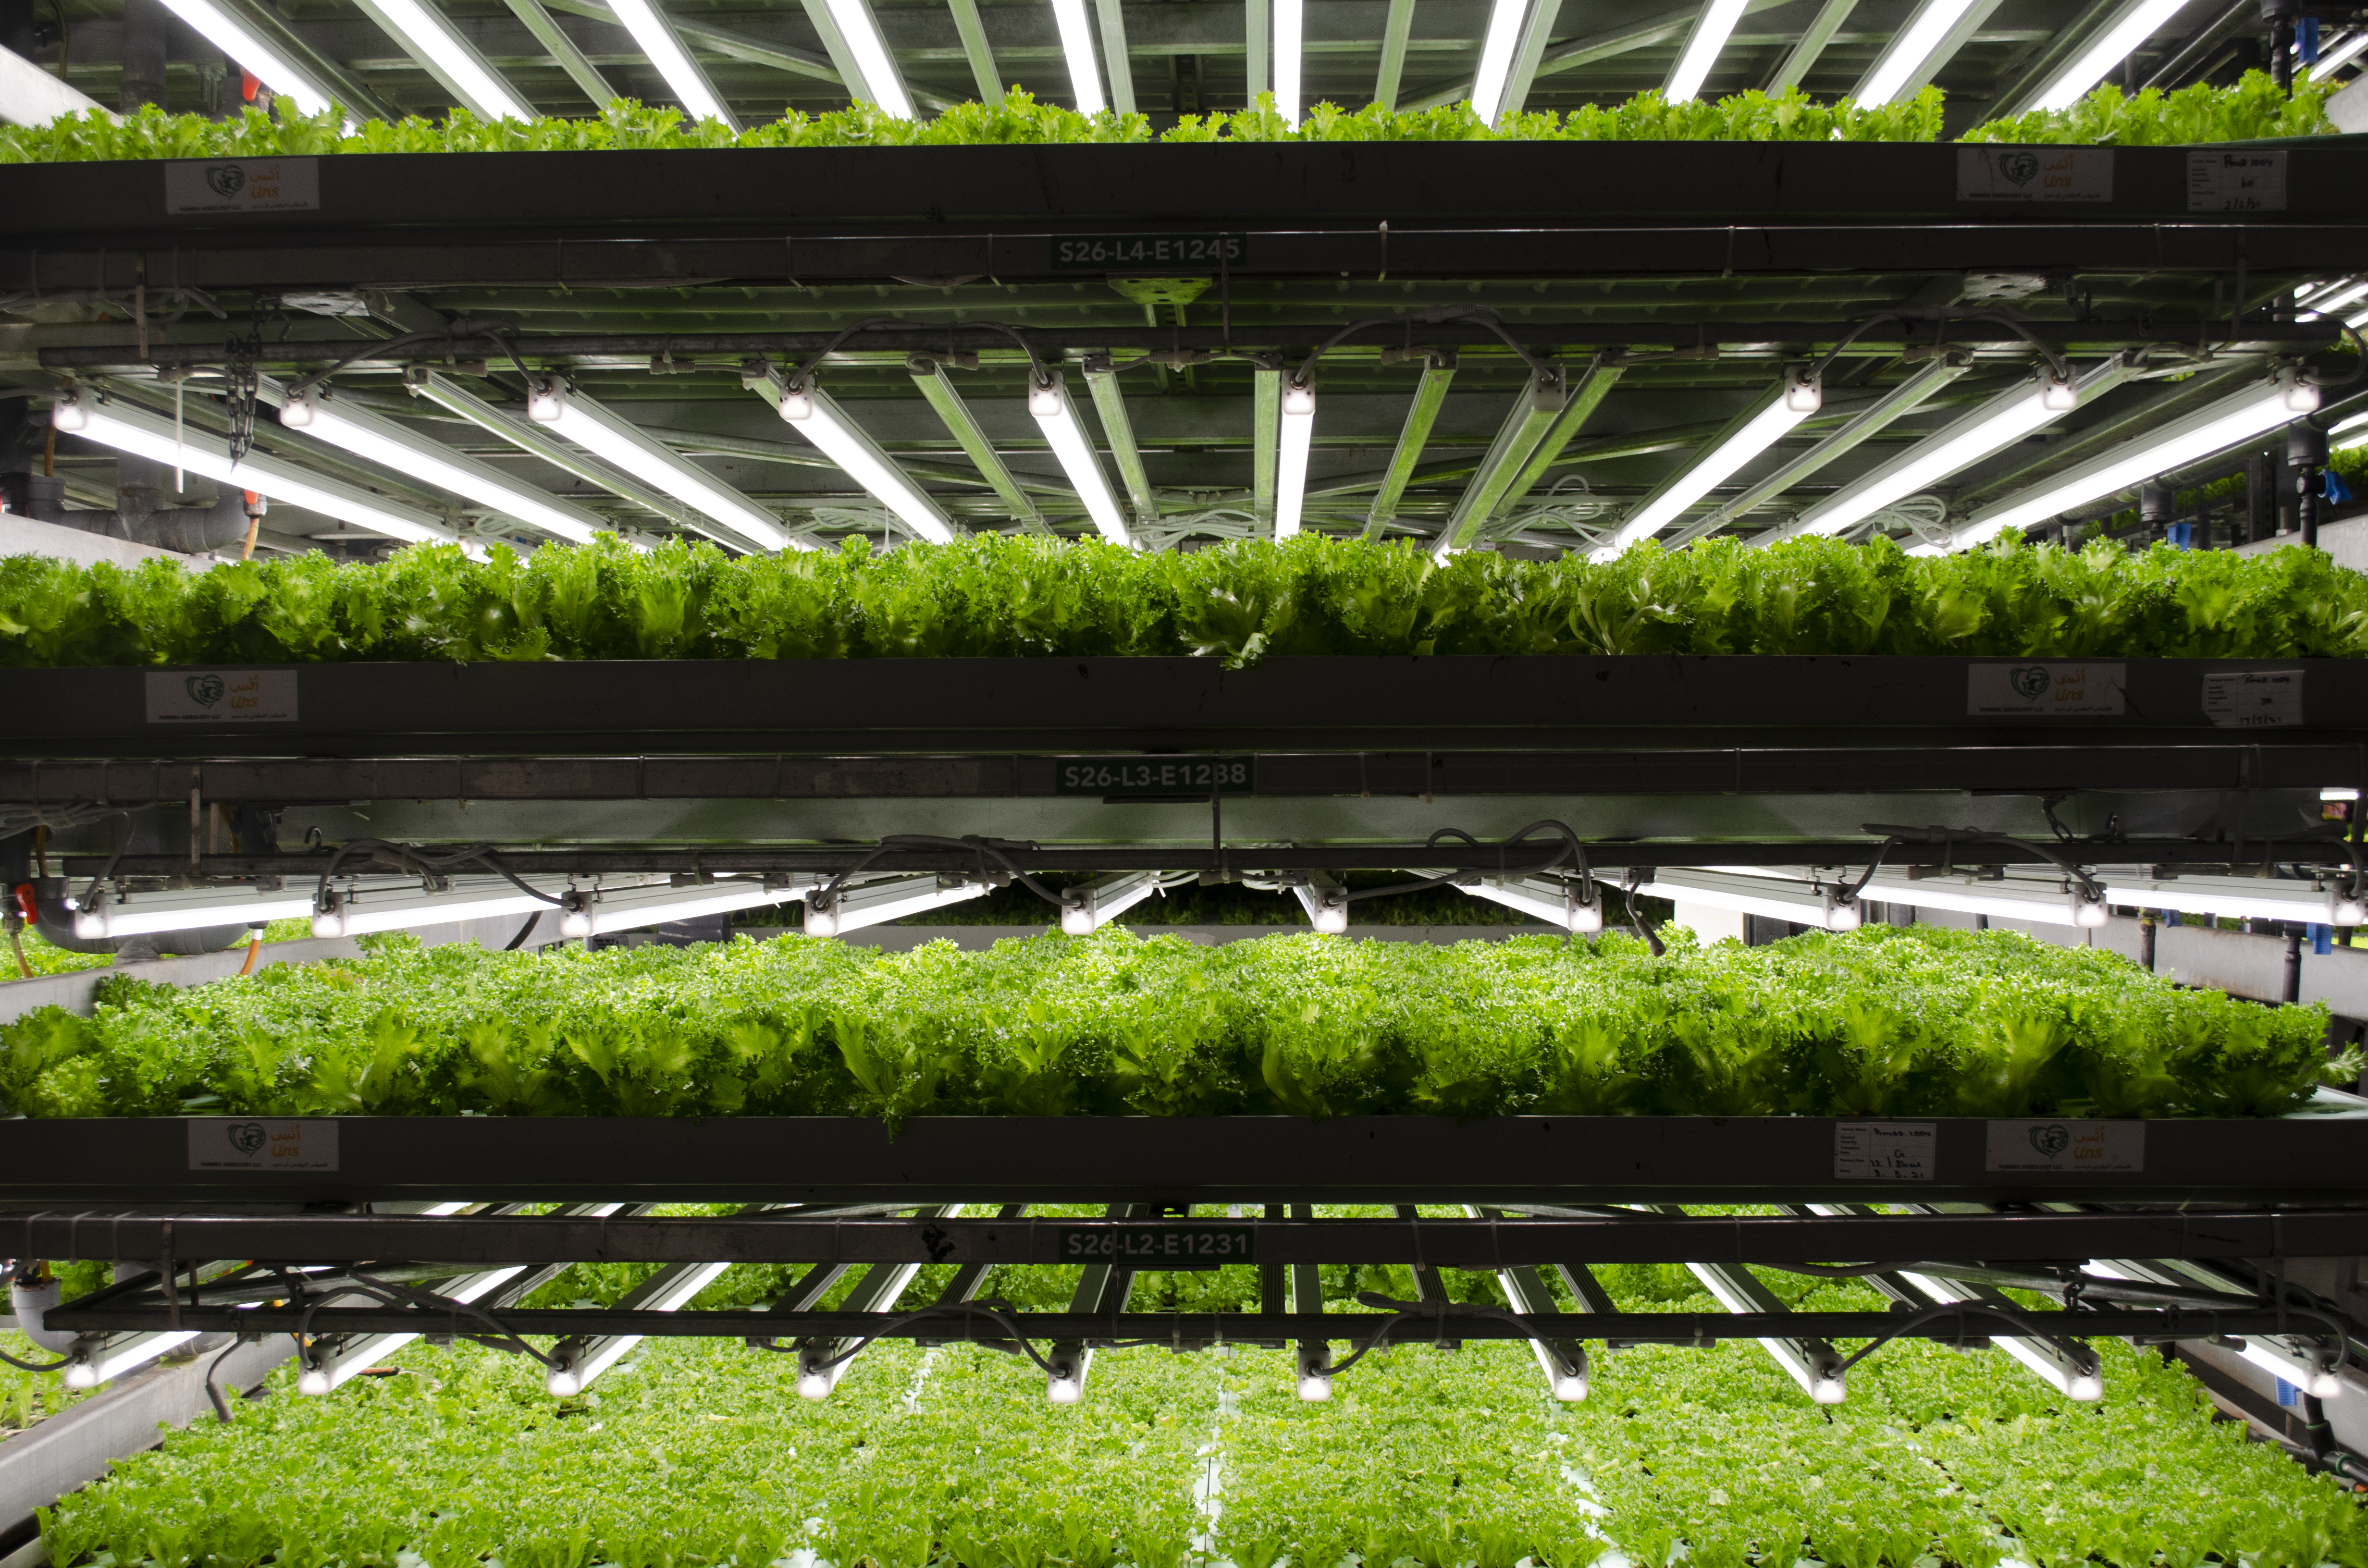 Revolutionizing Agriculture: Hydroponic Farming in Urban Environments